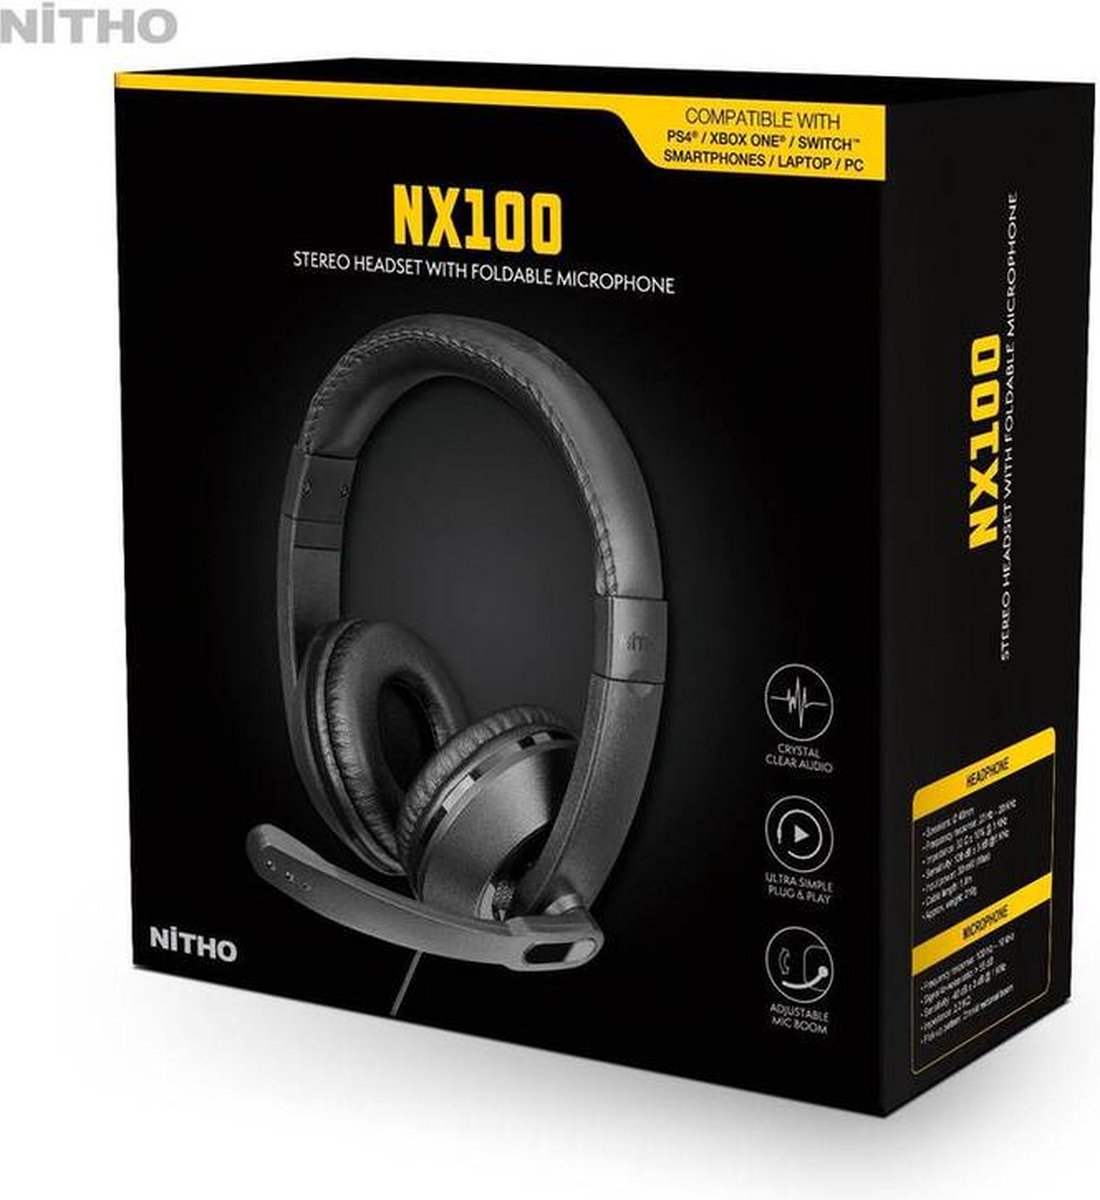 Nitho - NX100 Bedrade Stereo Gaming Headset Zwart voor PC, PS4/PS5, Xbox, Nintendo Switch